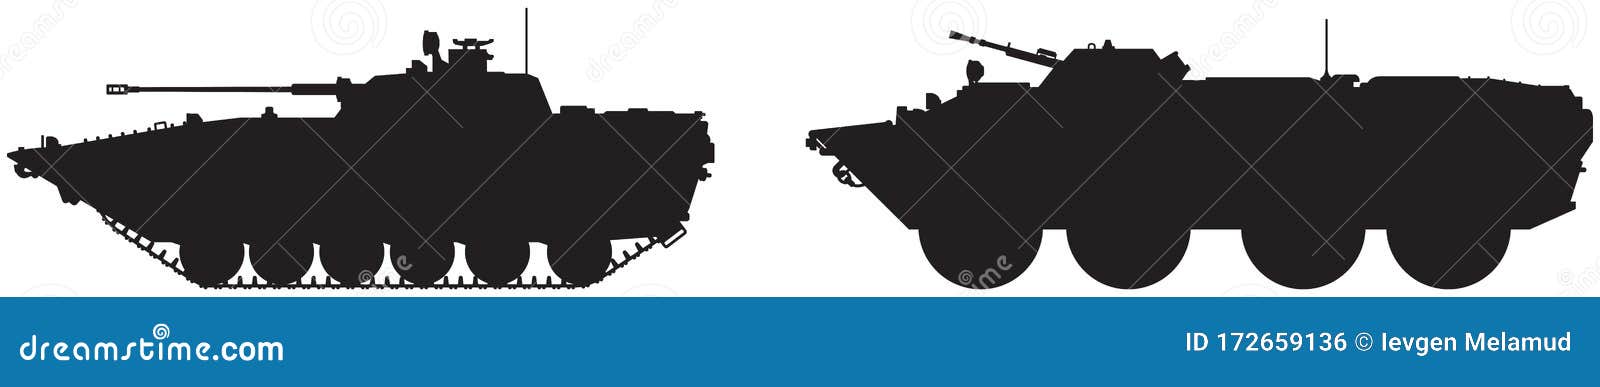 army tank and military vehicle  silhouettes set 1 afv bmp and apc btr